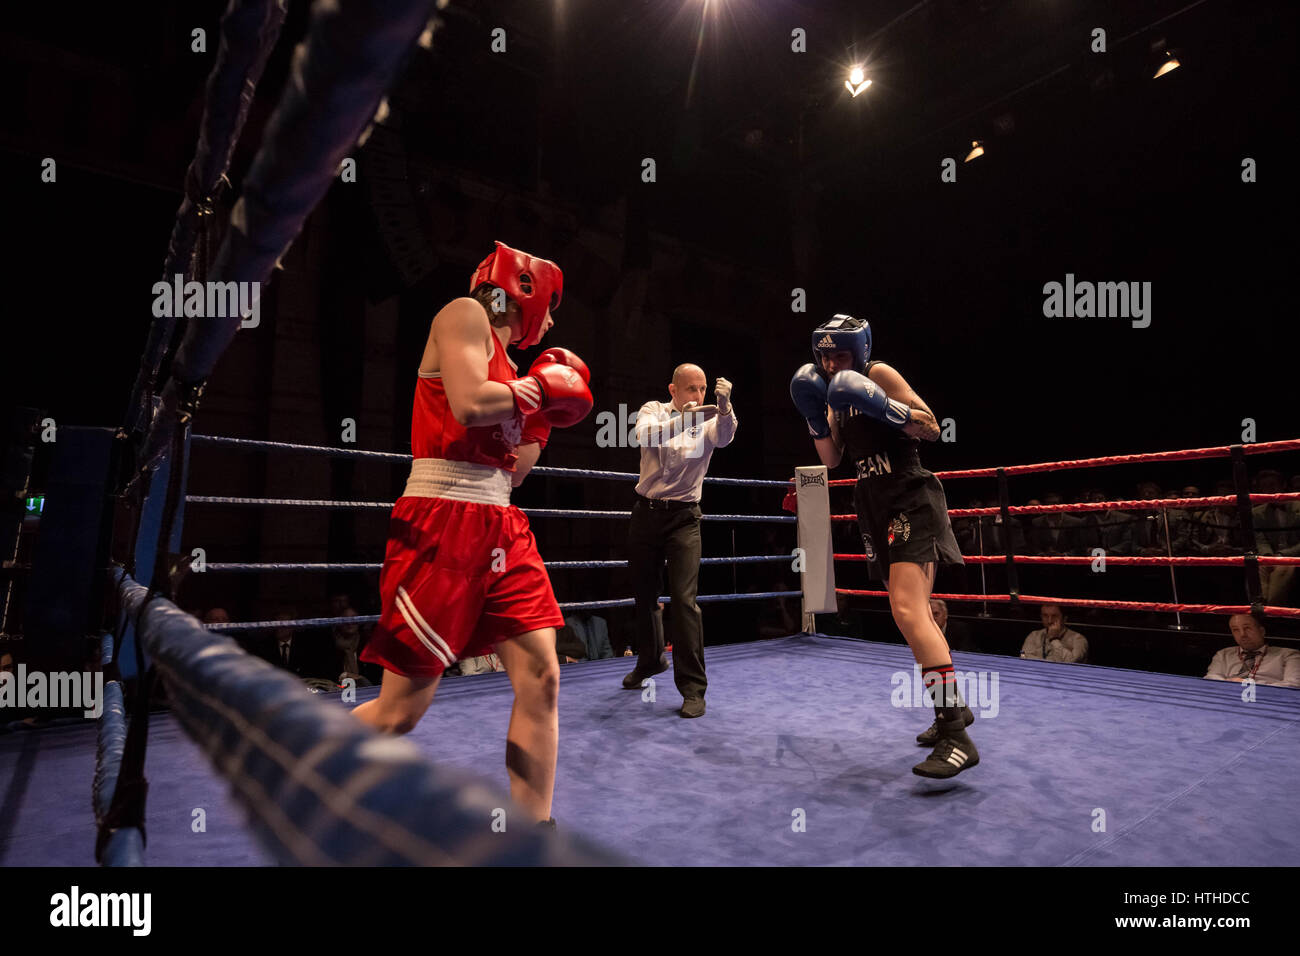 Cambridge, UK. 10th March, 2017. Lucy Harris (Red, Cambs) v Roni Dean (Thetford Town Boxing Club). Oxford vs Cambridge. 110th Boxing Varsity Match at the Cambridge Corn Exchange. © Guy Corbishley/Alamy Live News Stock Photo